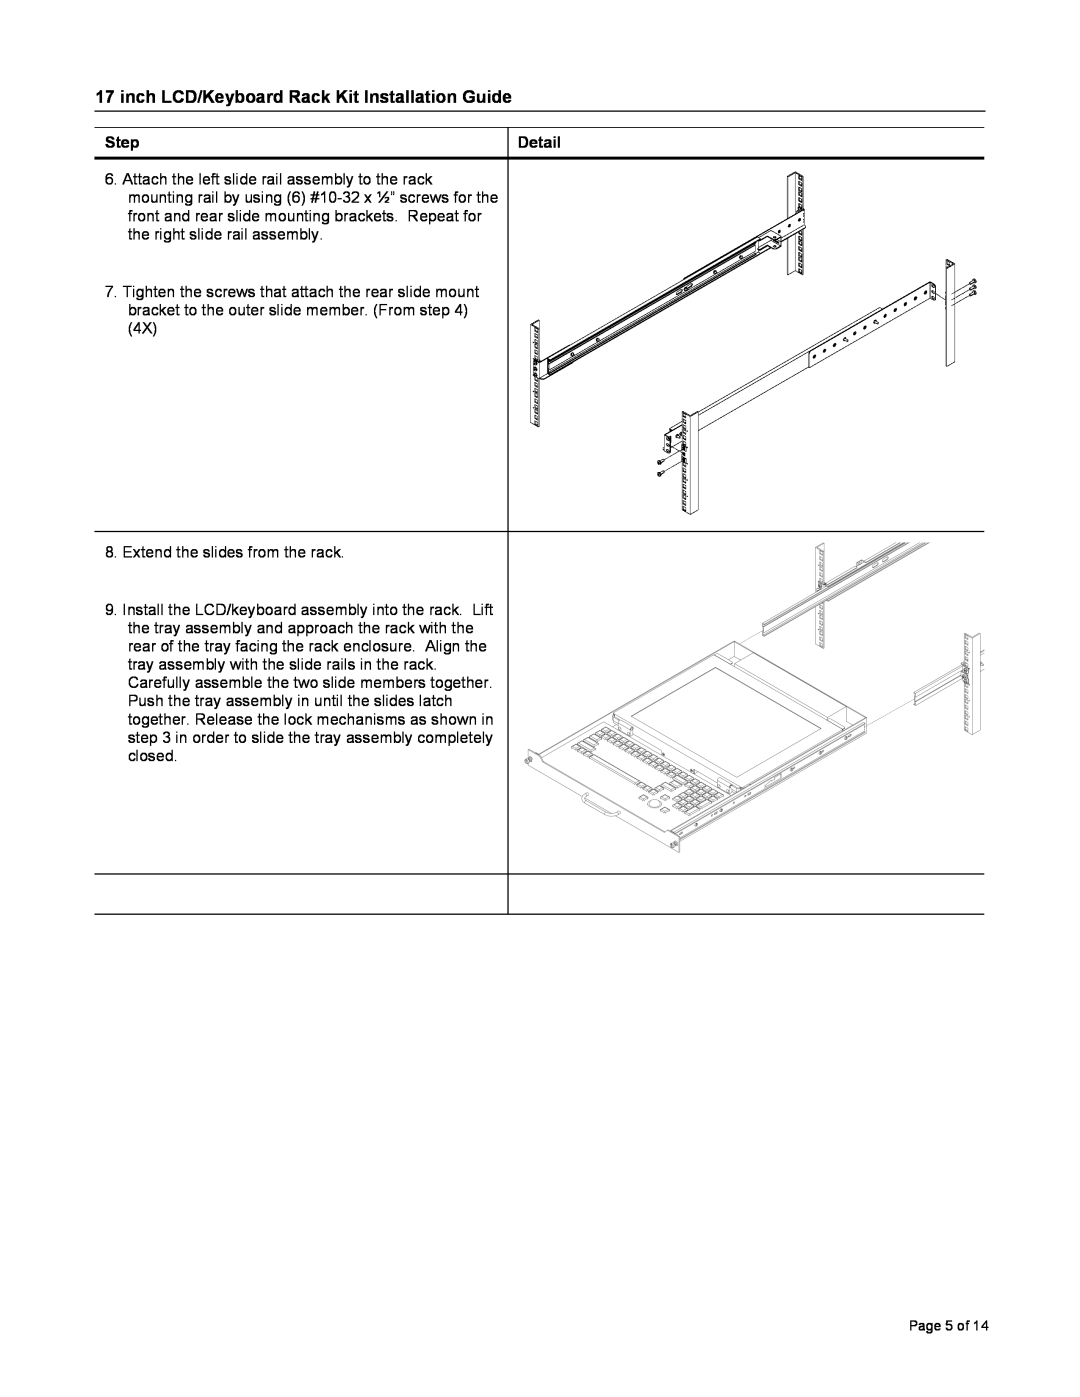 Neuro Logic Systems RFT-17 inch LCD/Keyboard Rack Kit Installation Guide, Step, Detail, Extend the slides from the rack 